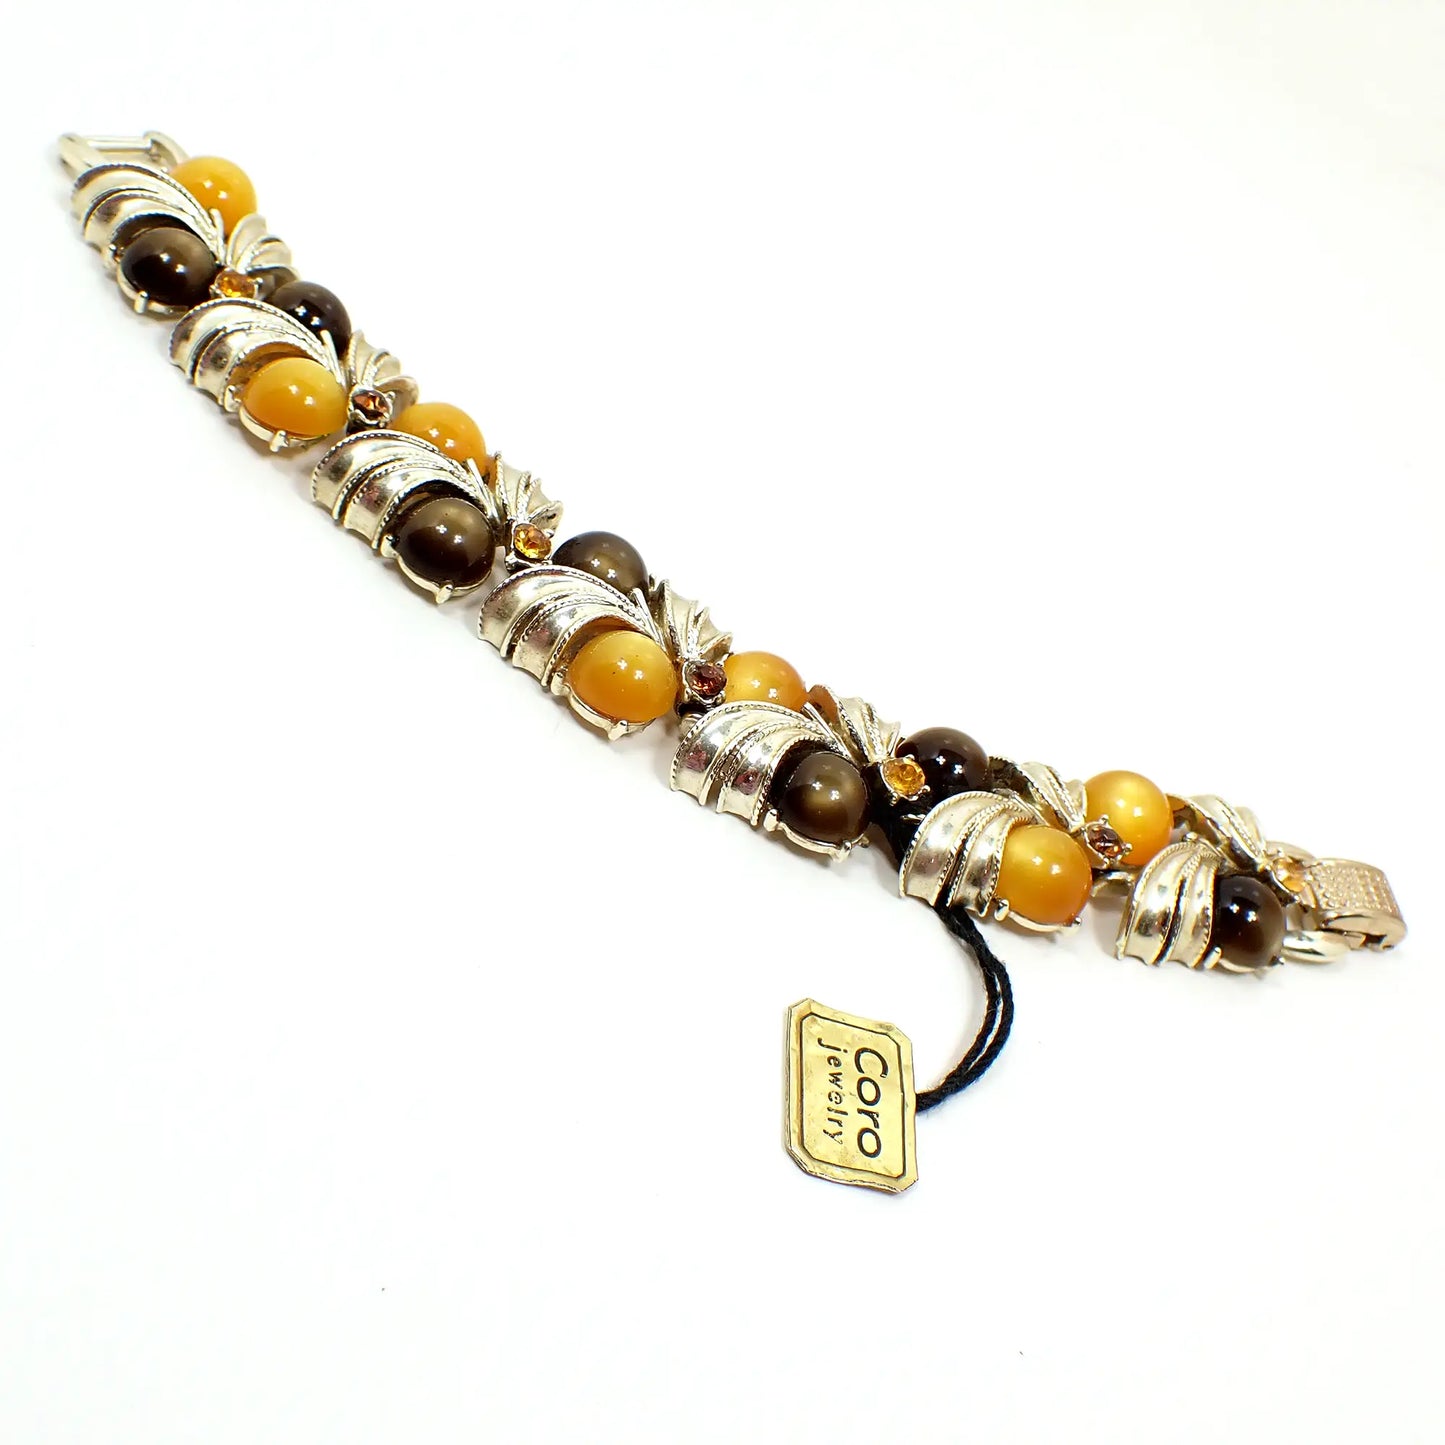 Coro Pegasus with Original Foil Tag 1950's Moonglow Thermoset and Rhinestone Vintage Link Bracelet in Fall Colors